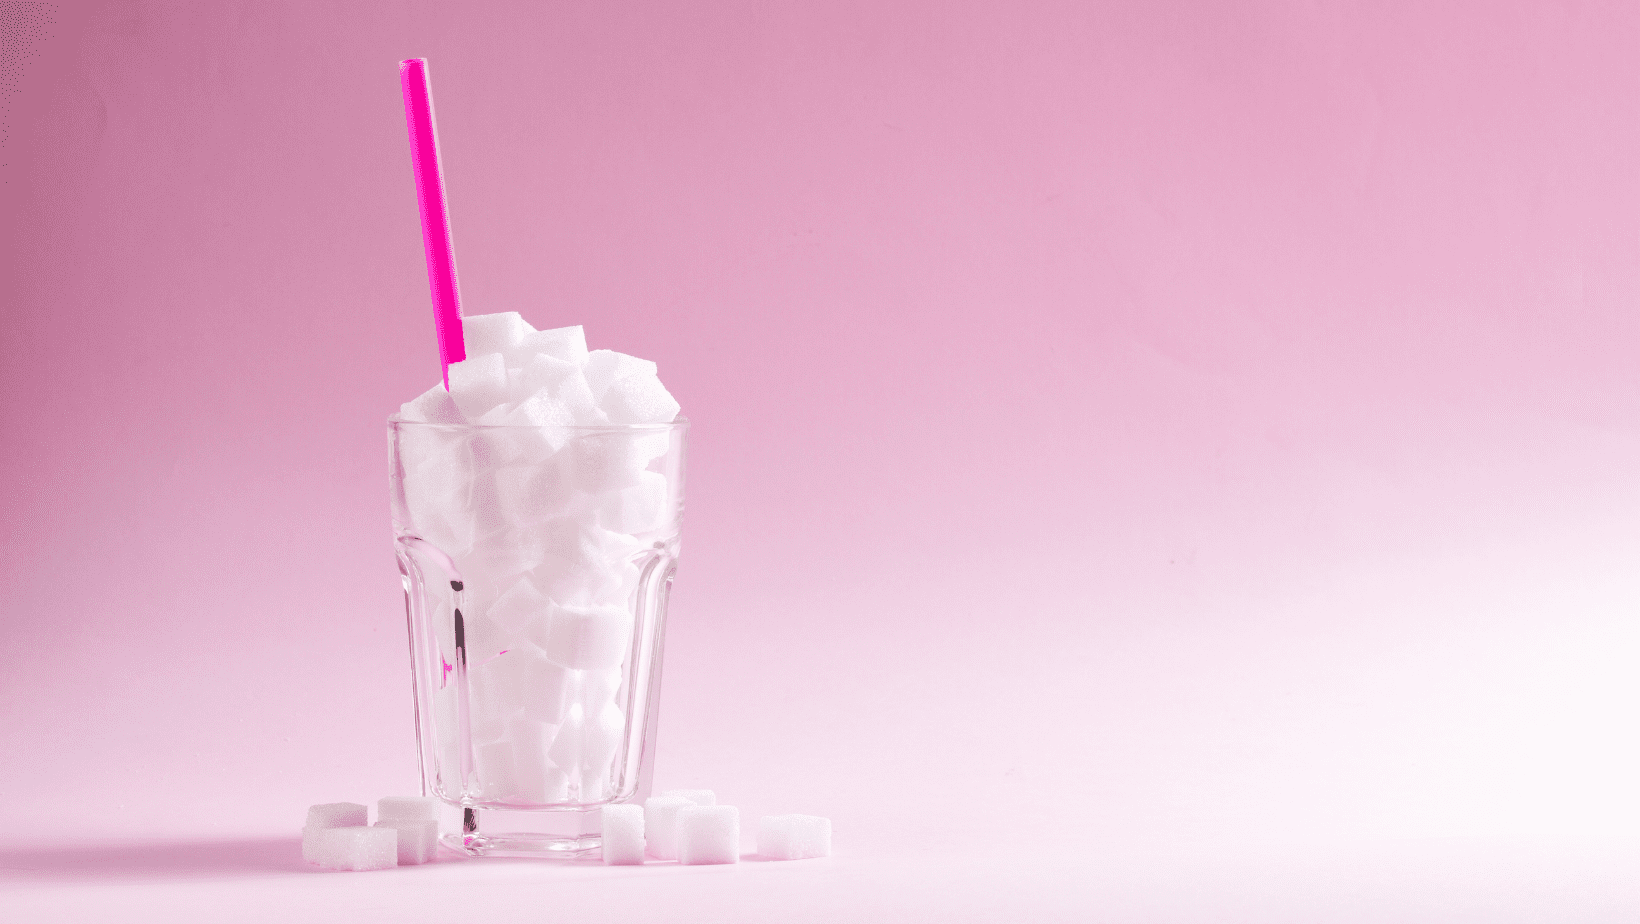 glass of sugar cubes